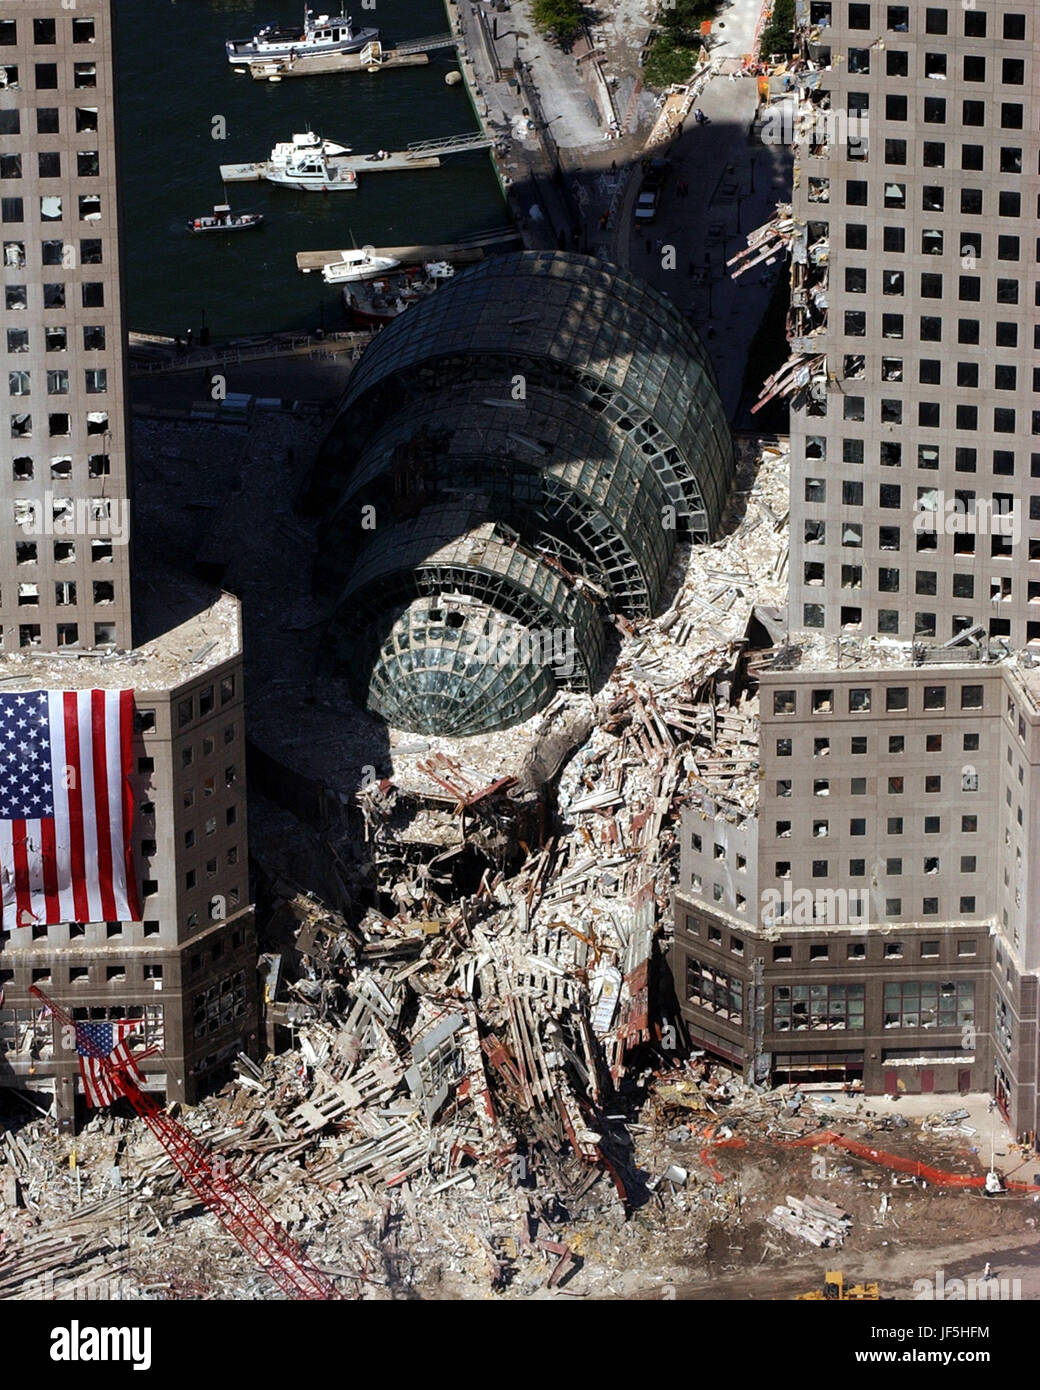 010917-N-7479T-513 Ground Zero, New York City, N.Y. (Sept. 17, 2001) -- An aerial view shows only a small portion of the crime scene where the World Trade Center collapsed following the Sept. 11 terrorist attack.  Surrounding buildings were heavily damaged by the debris and massive force of the falling twin towers.  Clean-up efforts are expected to continue for months.  U.S. Navy photo by Chief Photographer's Mate Eric J. Tilford. Stock Photo